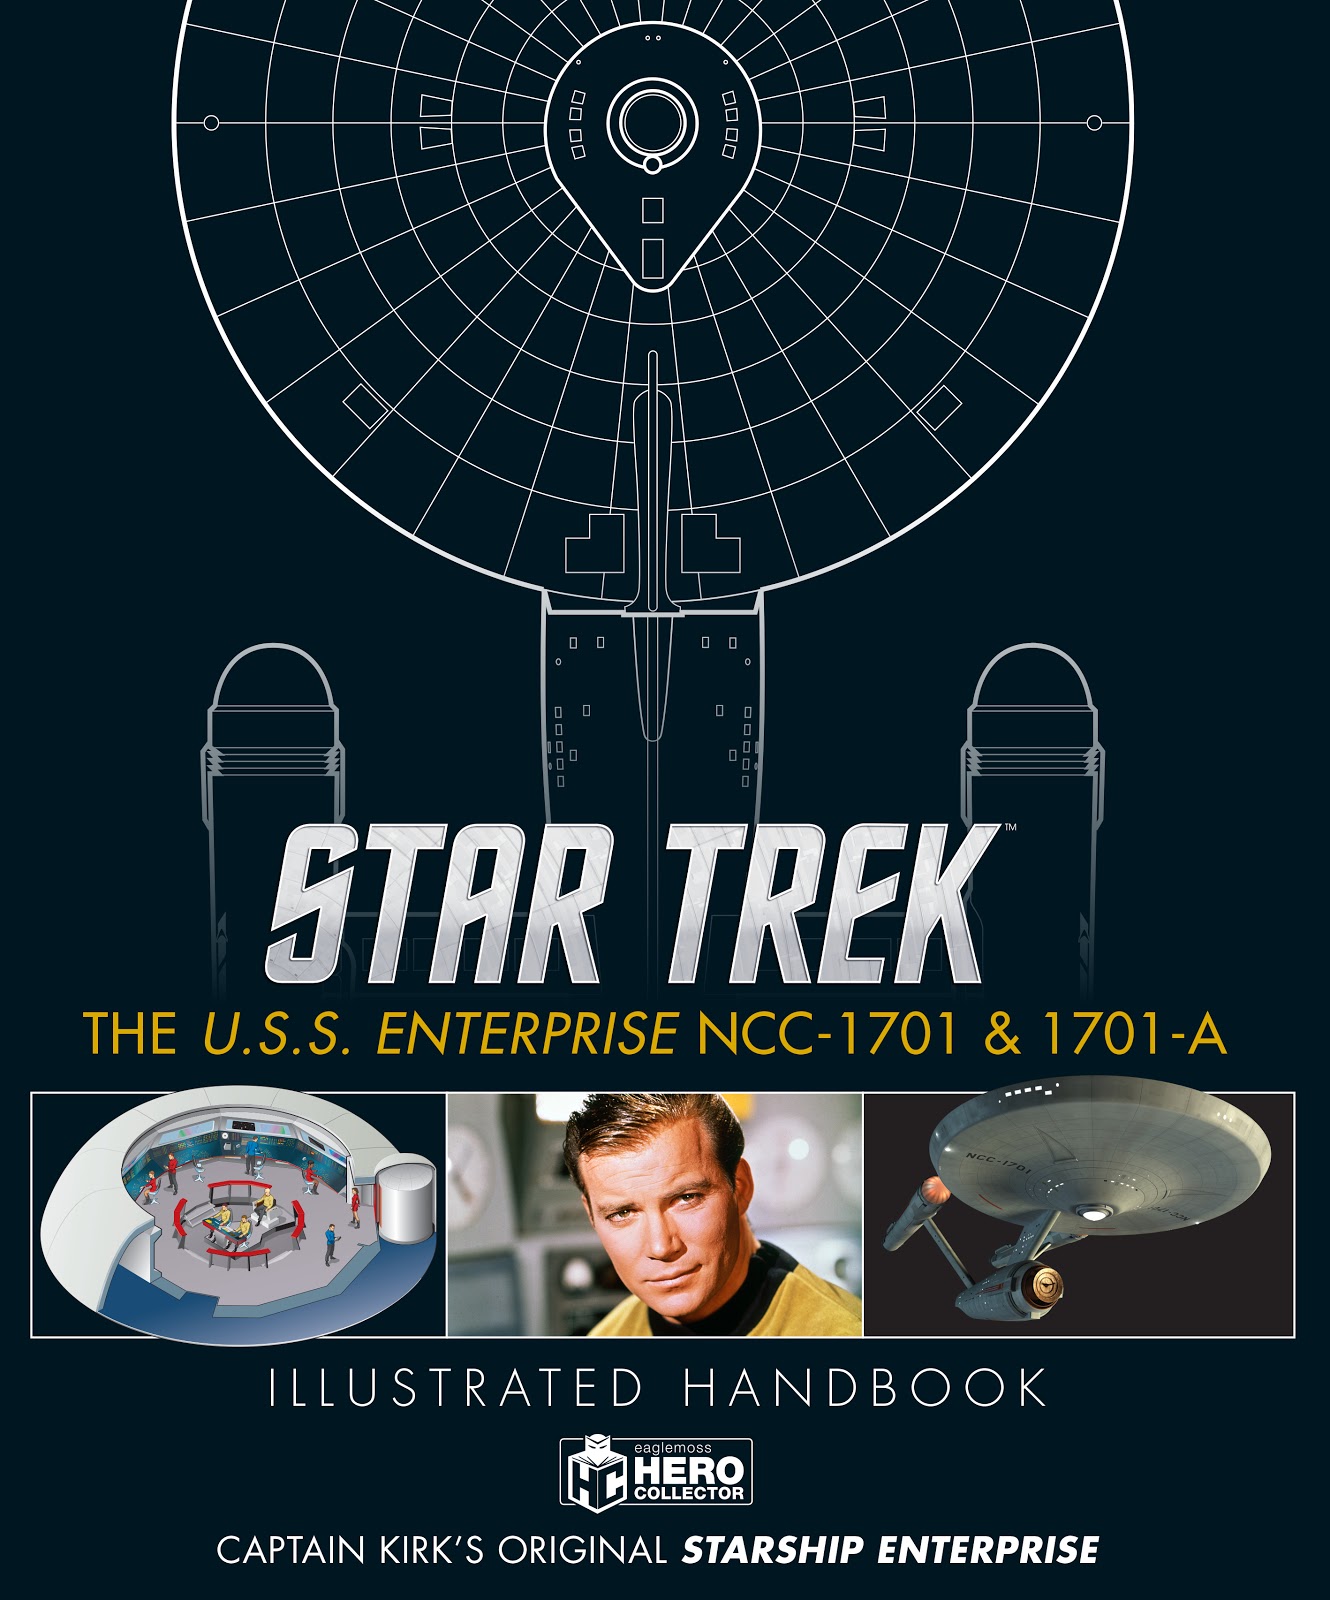 The Trek Collective Eaglemoss Starship Book Previews Voyager Book Coming Disco Cutaway And Concept Art And More